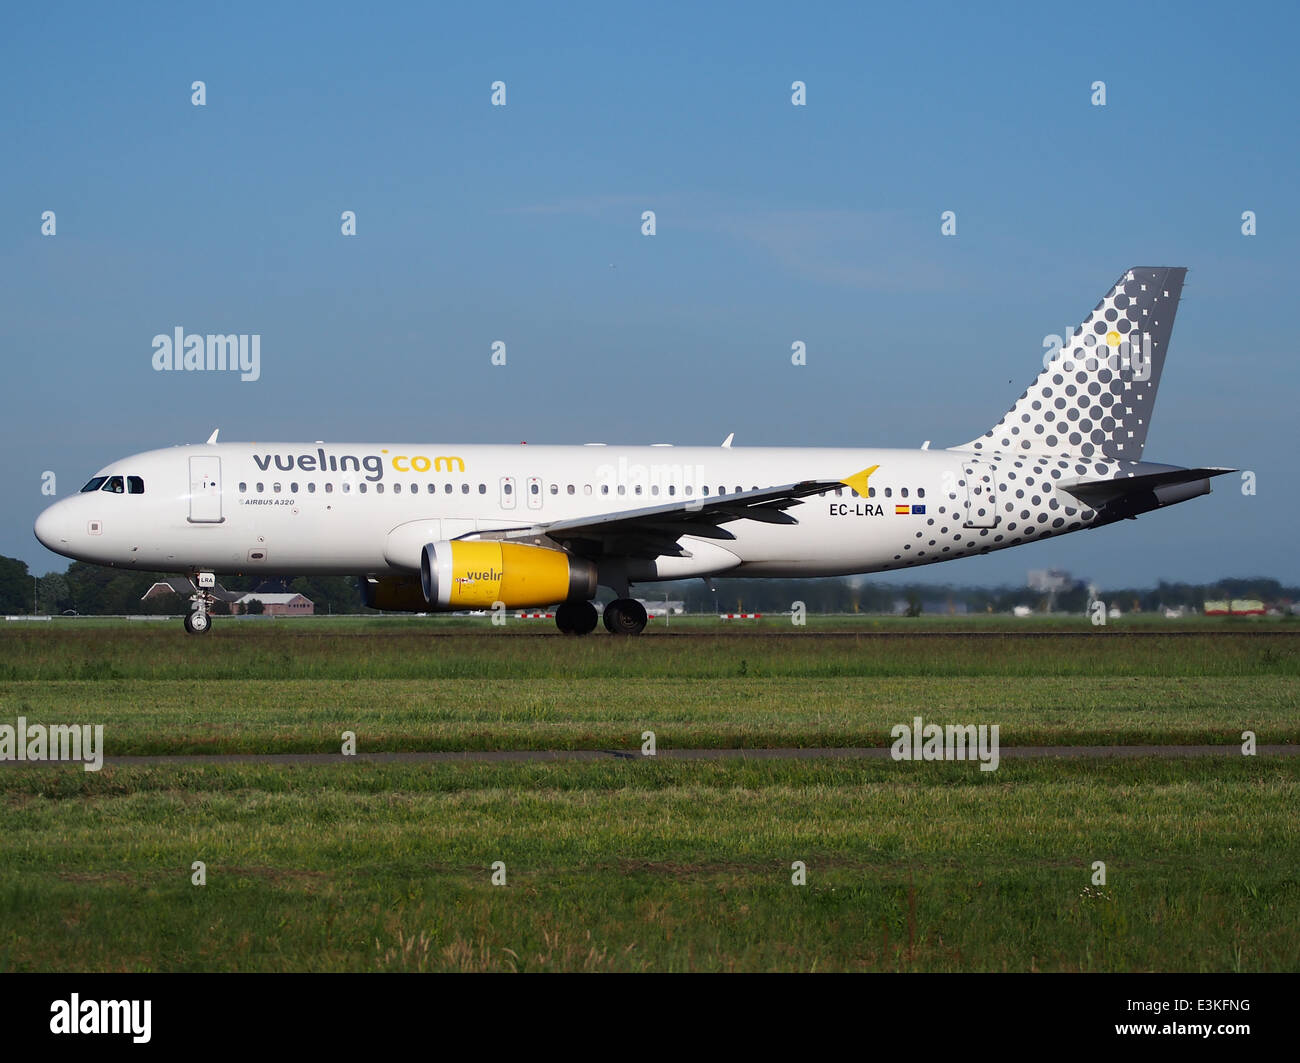 EC-LRA Vueling Airbus A320-232 takeoff from Schiphol (AMS - EHAM), The Netherlands, 11june2014, pic-2 Stock Photo